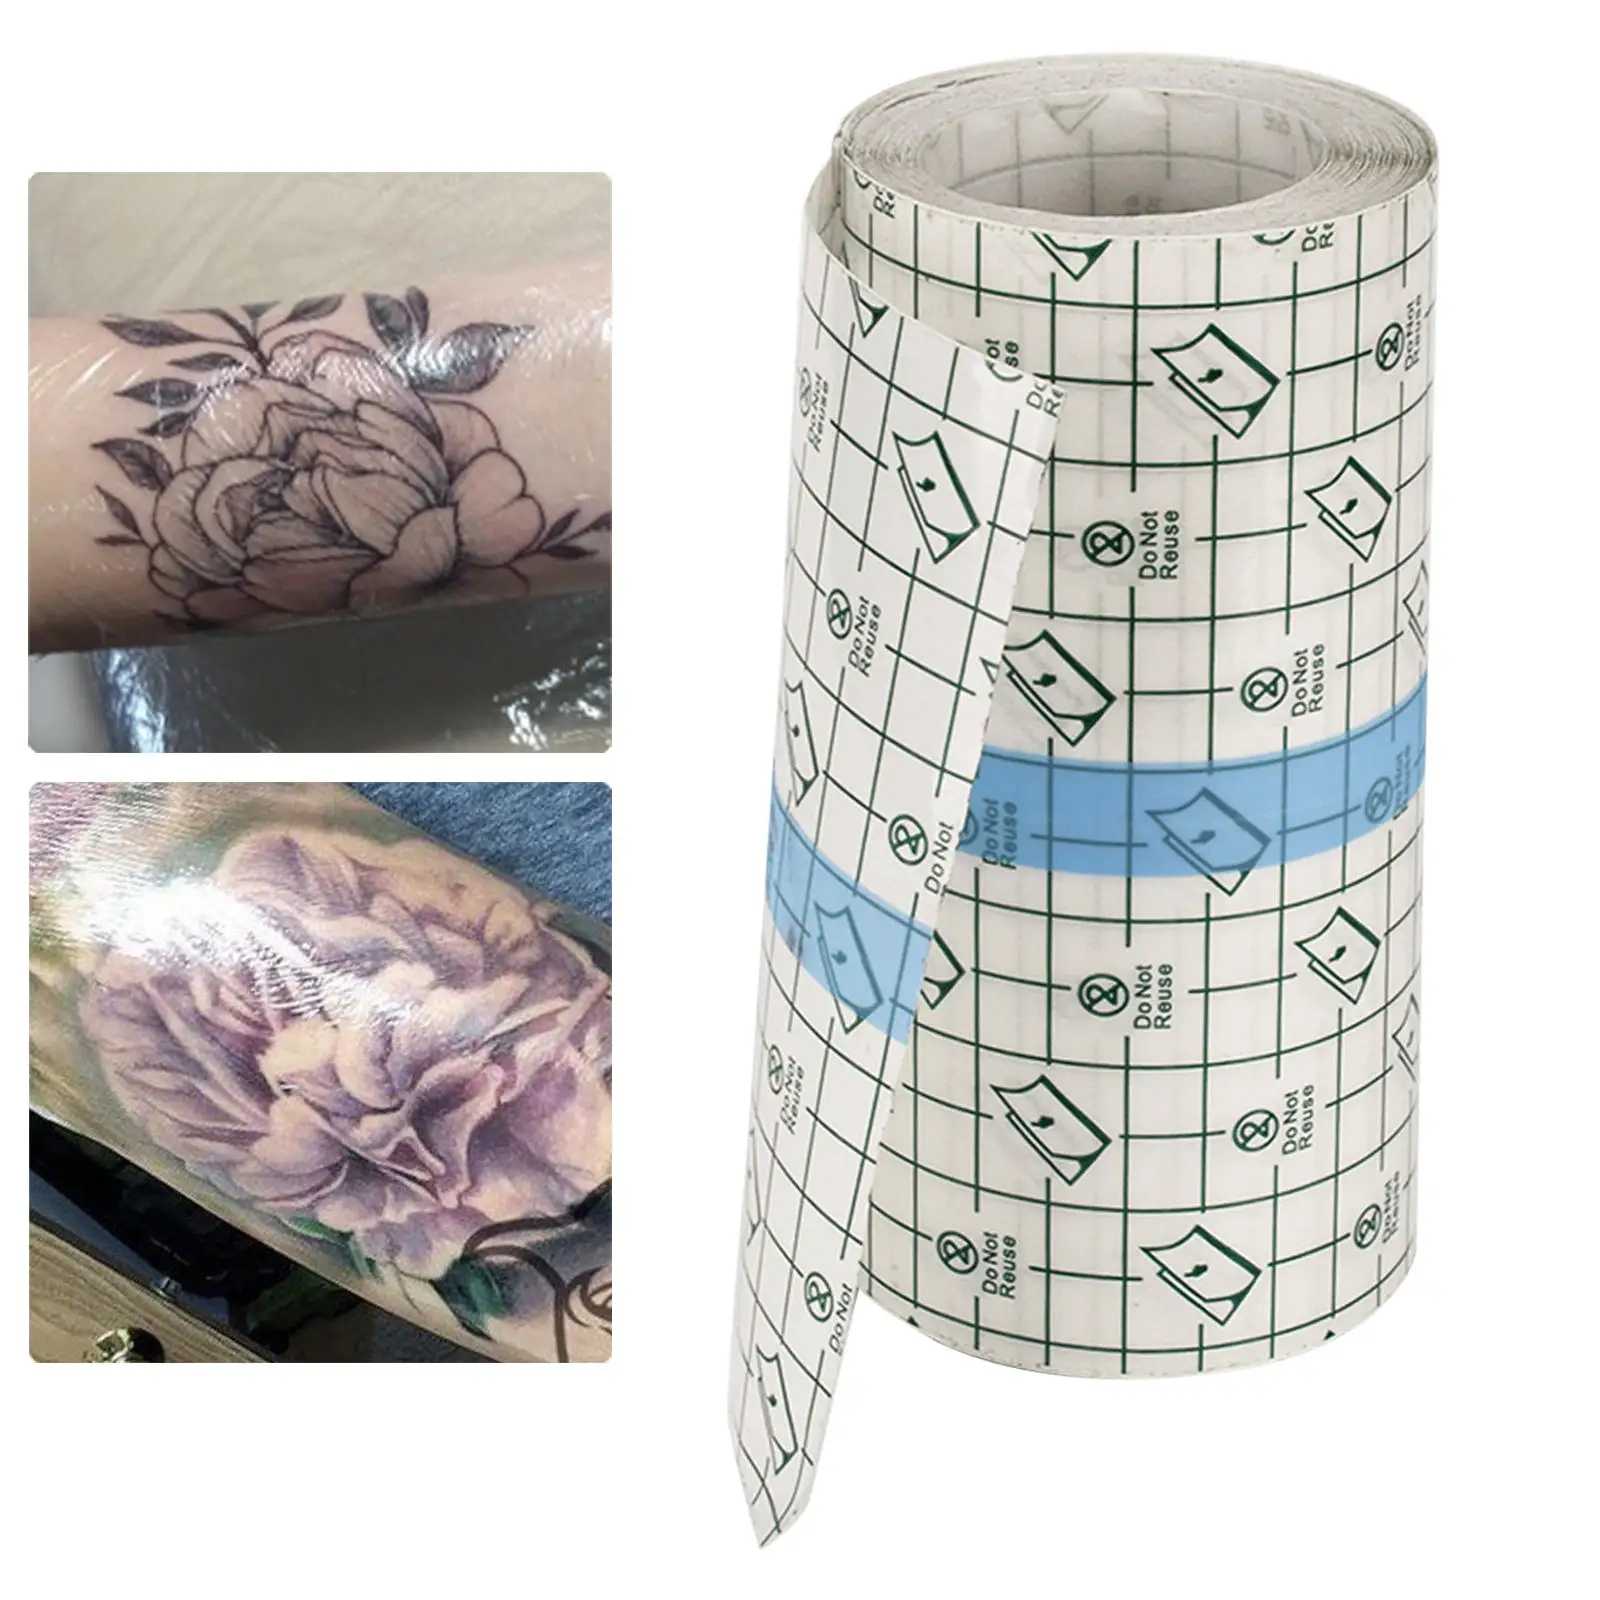 Tattoo Aftercare Bandages Roll Tattoo Wrap Bandage Transparent Film Tattoo Supplies Waterproof Adhesive Wrap Protective Bandages